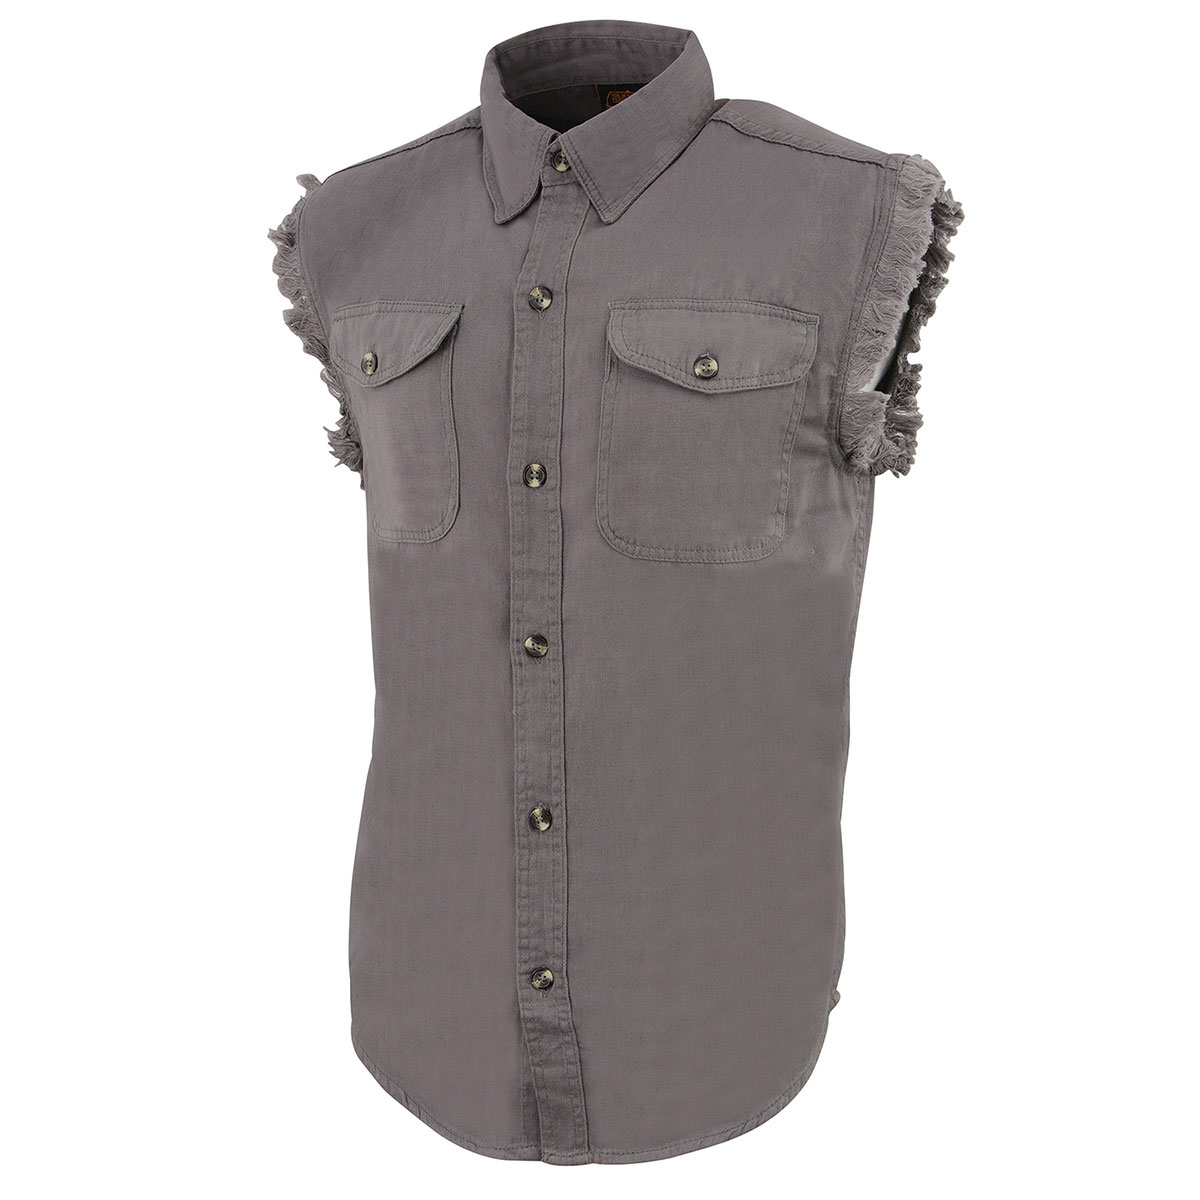 Milwaukee Leather DM4004 Men's Grey Lightweight Denim Shirt with with Frayed Cut Off Sleeveless Look 4X-Large - image 4 of 5